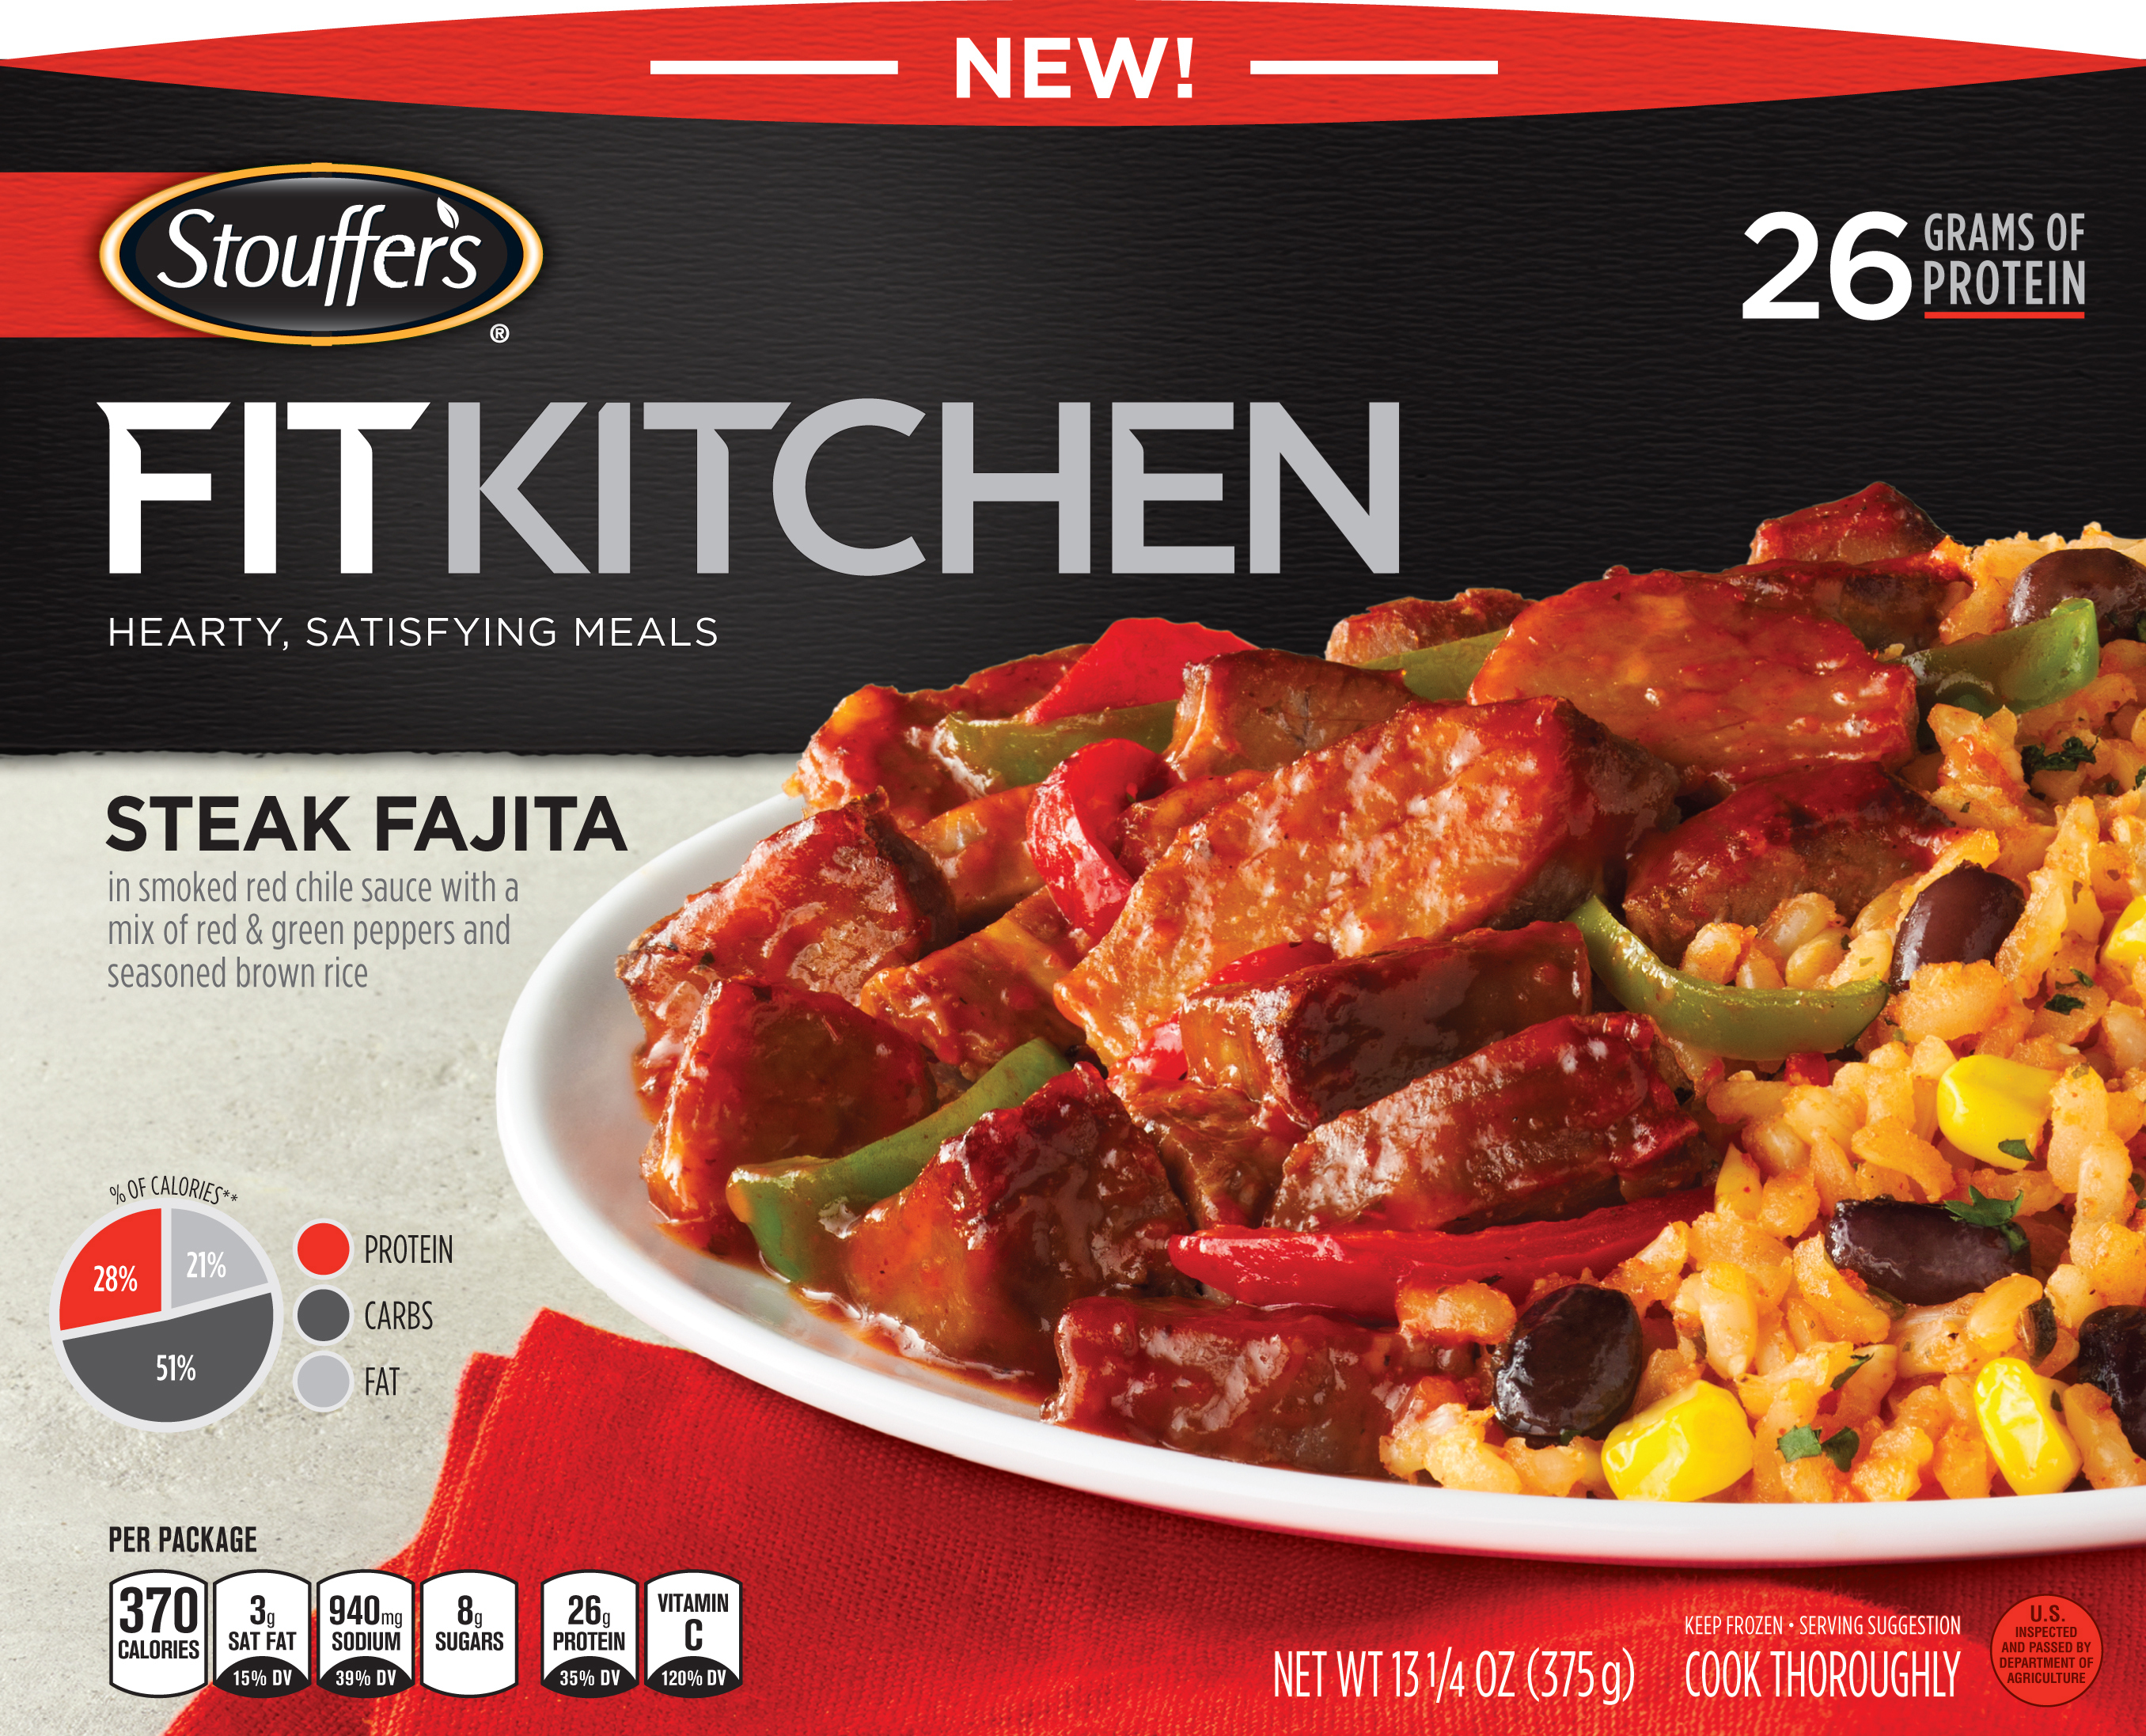 STOUFFERS Rolls Out New Protein Packed Frozen Meal Line